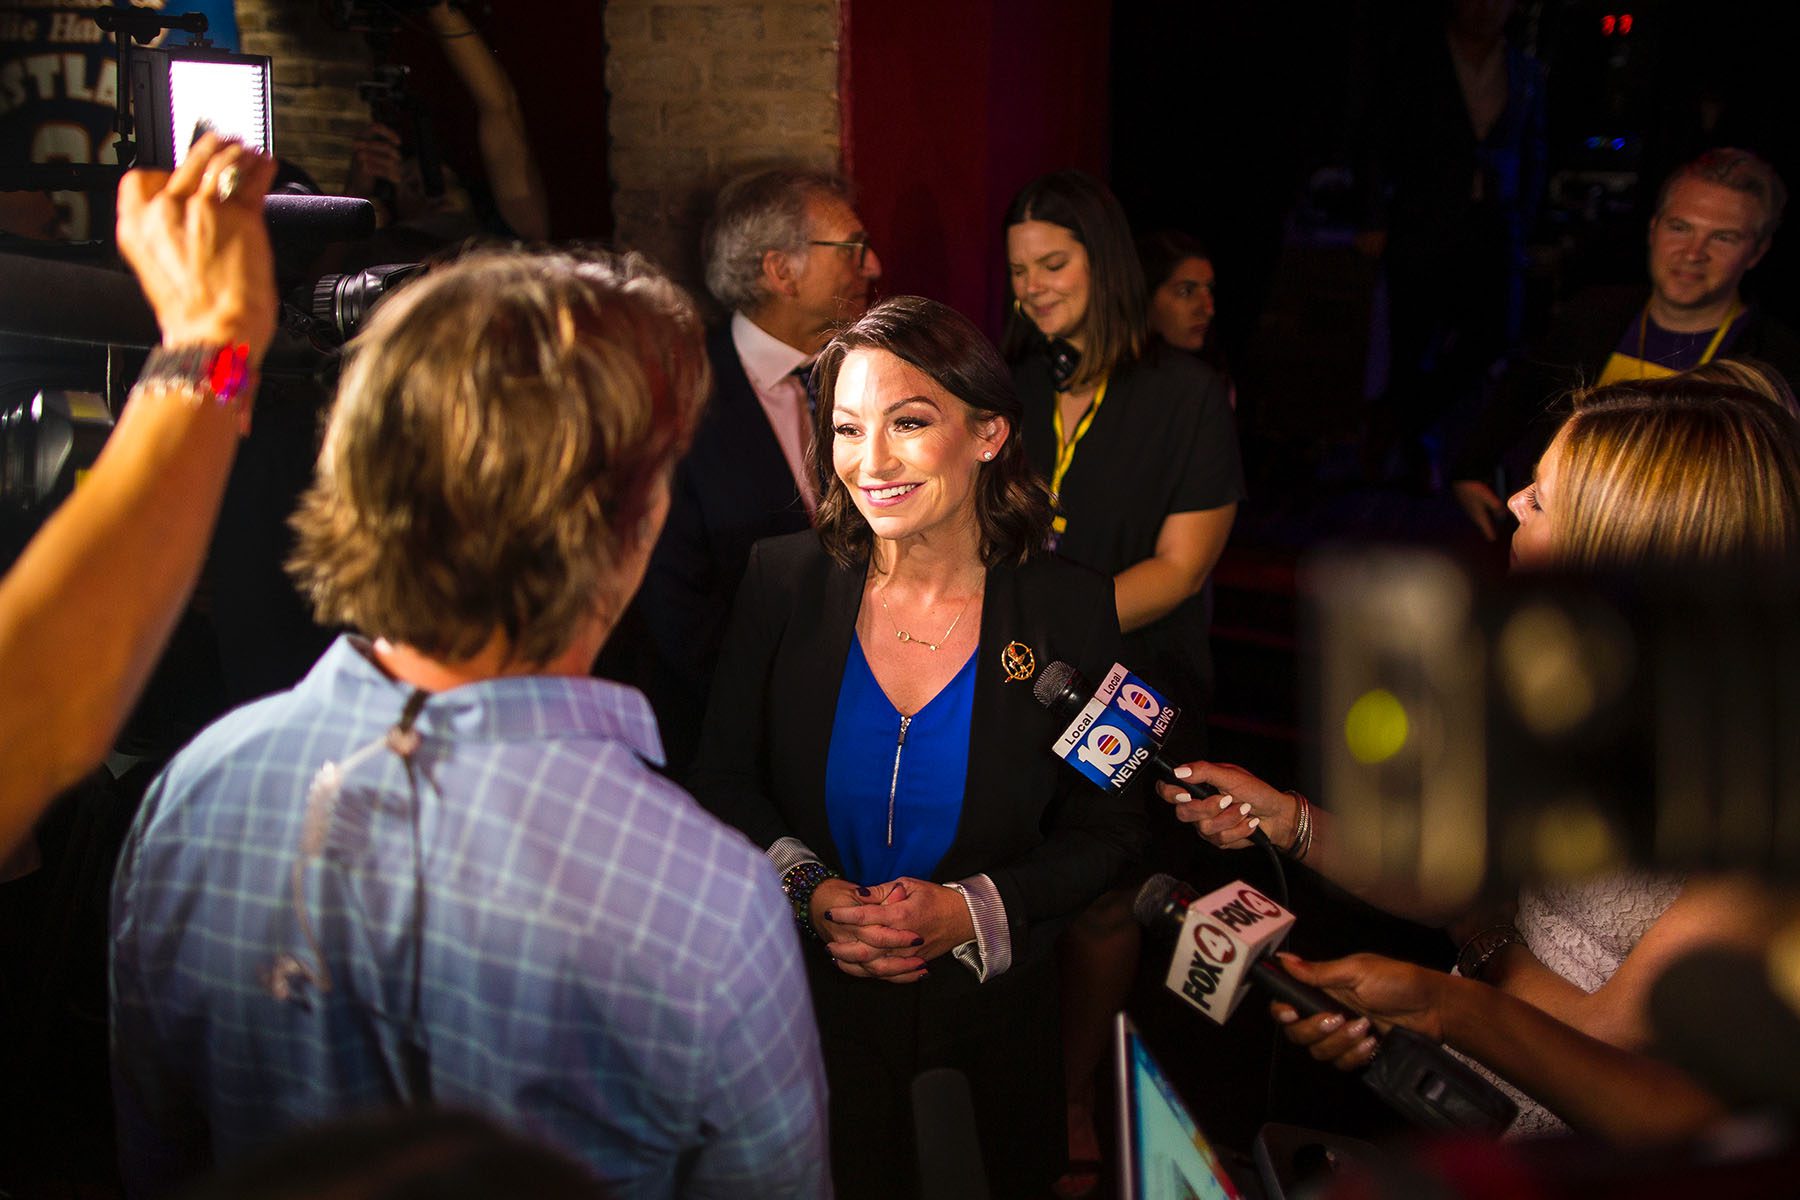 Nikki Fried speaks to the media during an election night event for her gubernatorial campaign.